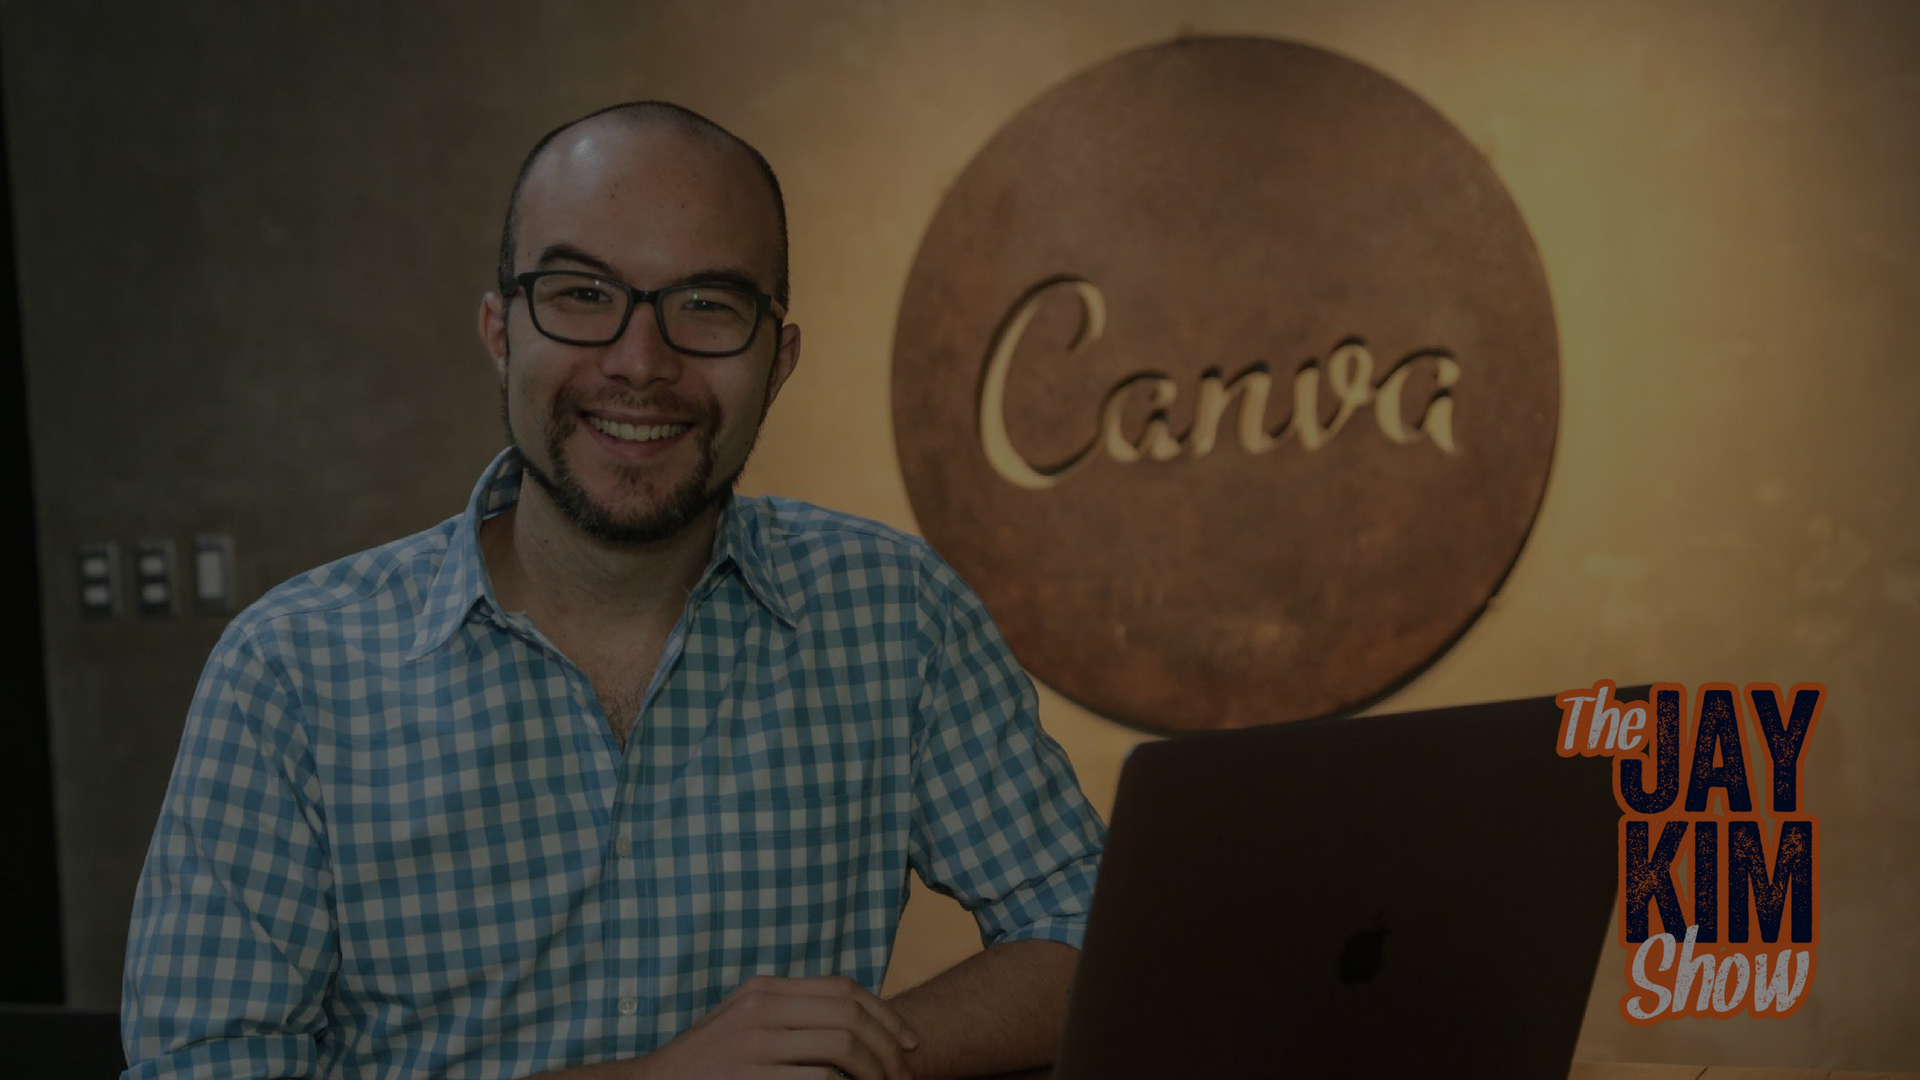 Cameron Adams, co-founder and chief product officer of Canva